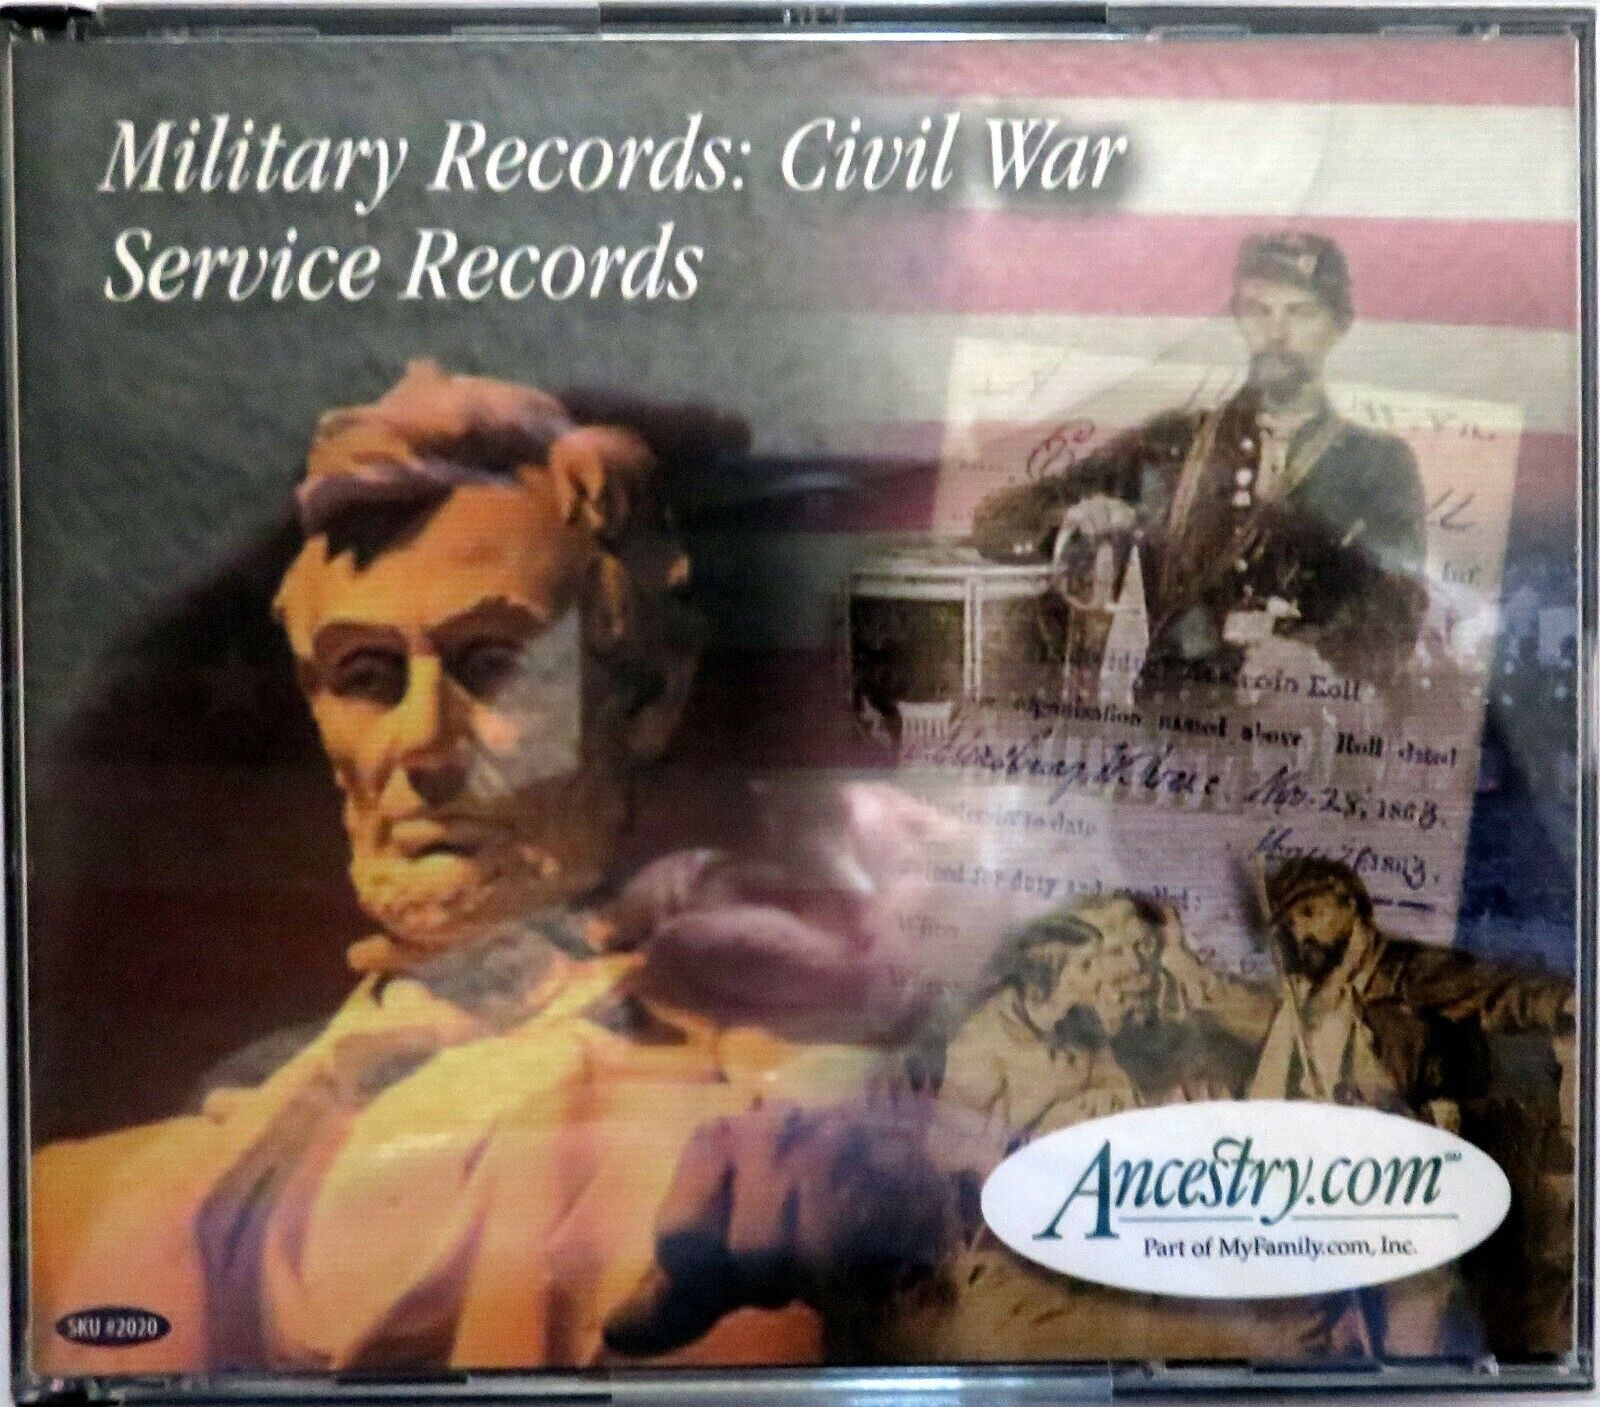 Ancestry MILITARY RECORDS: CIVIL WAR SERVICE 20 Cheap mail Max 56% OFF order specialty store - CDs 3 RECORDS